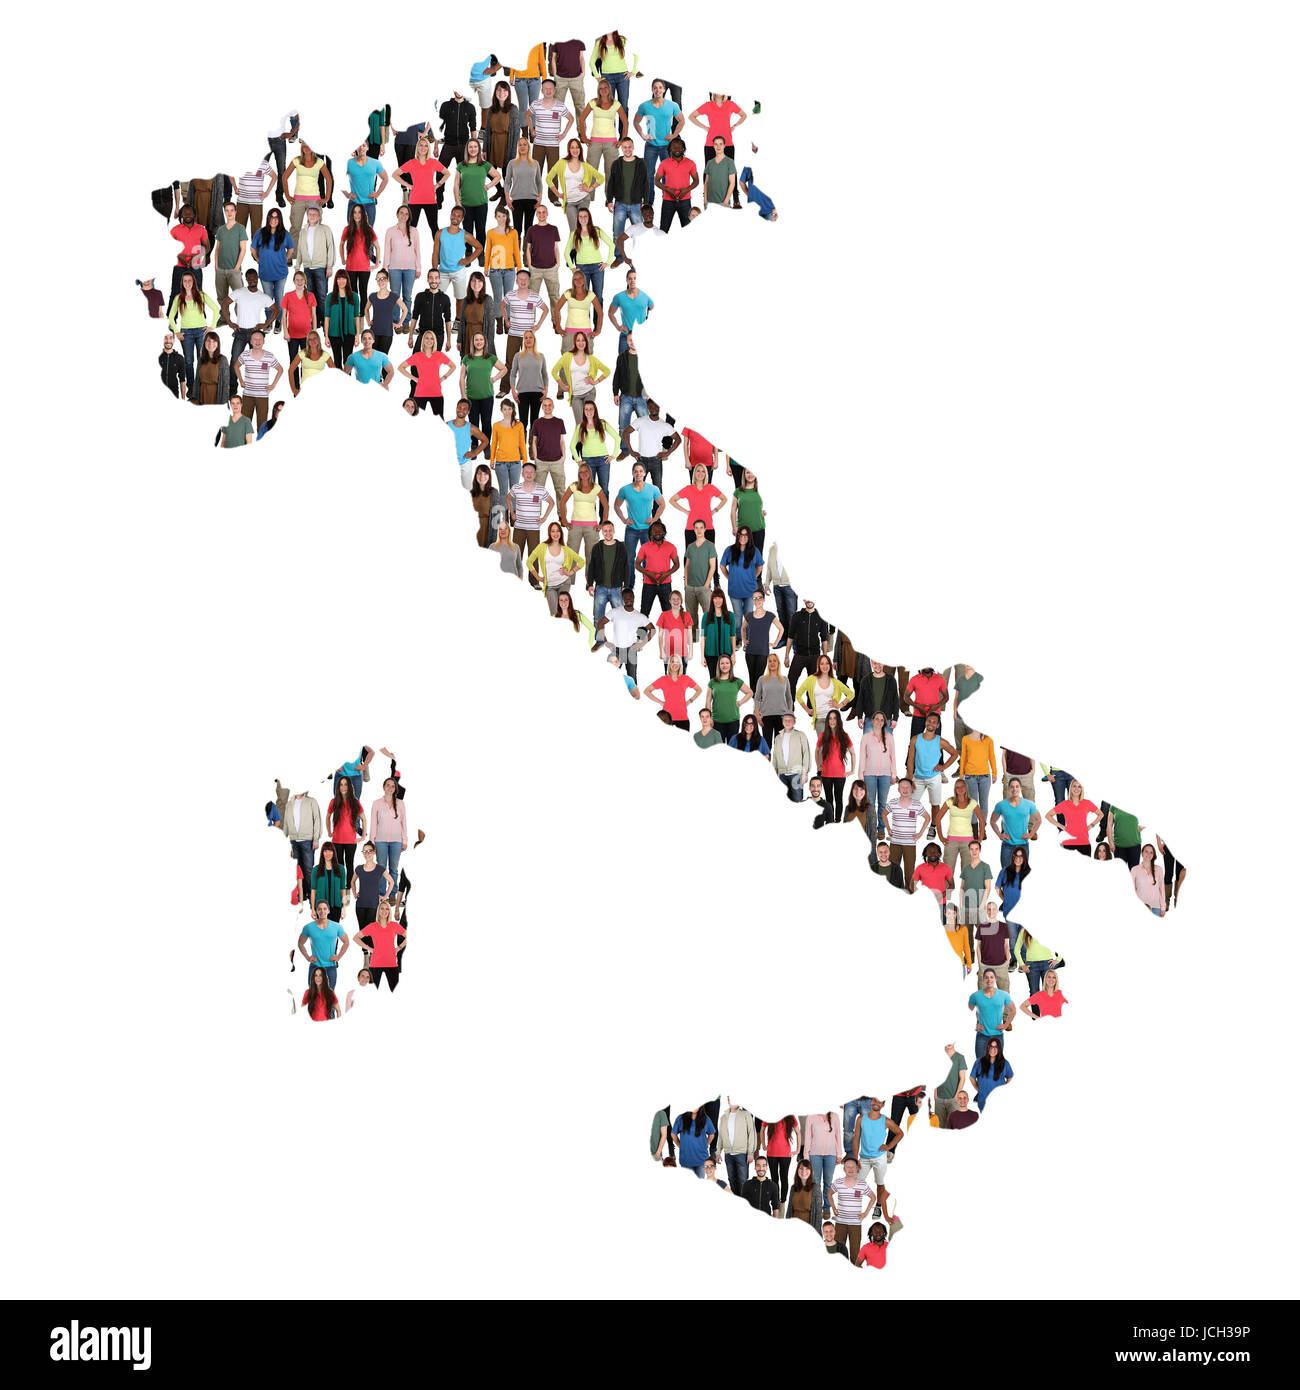 Italy map multicultural group of people integration immigration diversity isolated Stock Photo